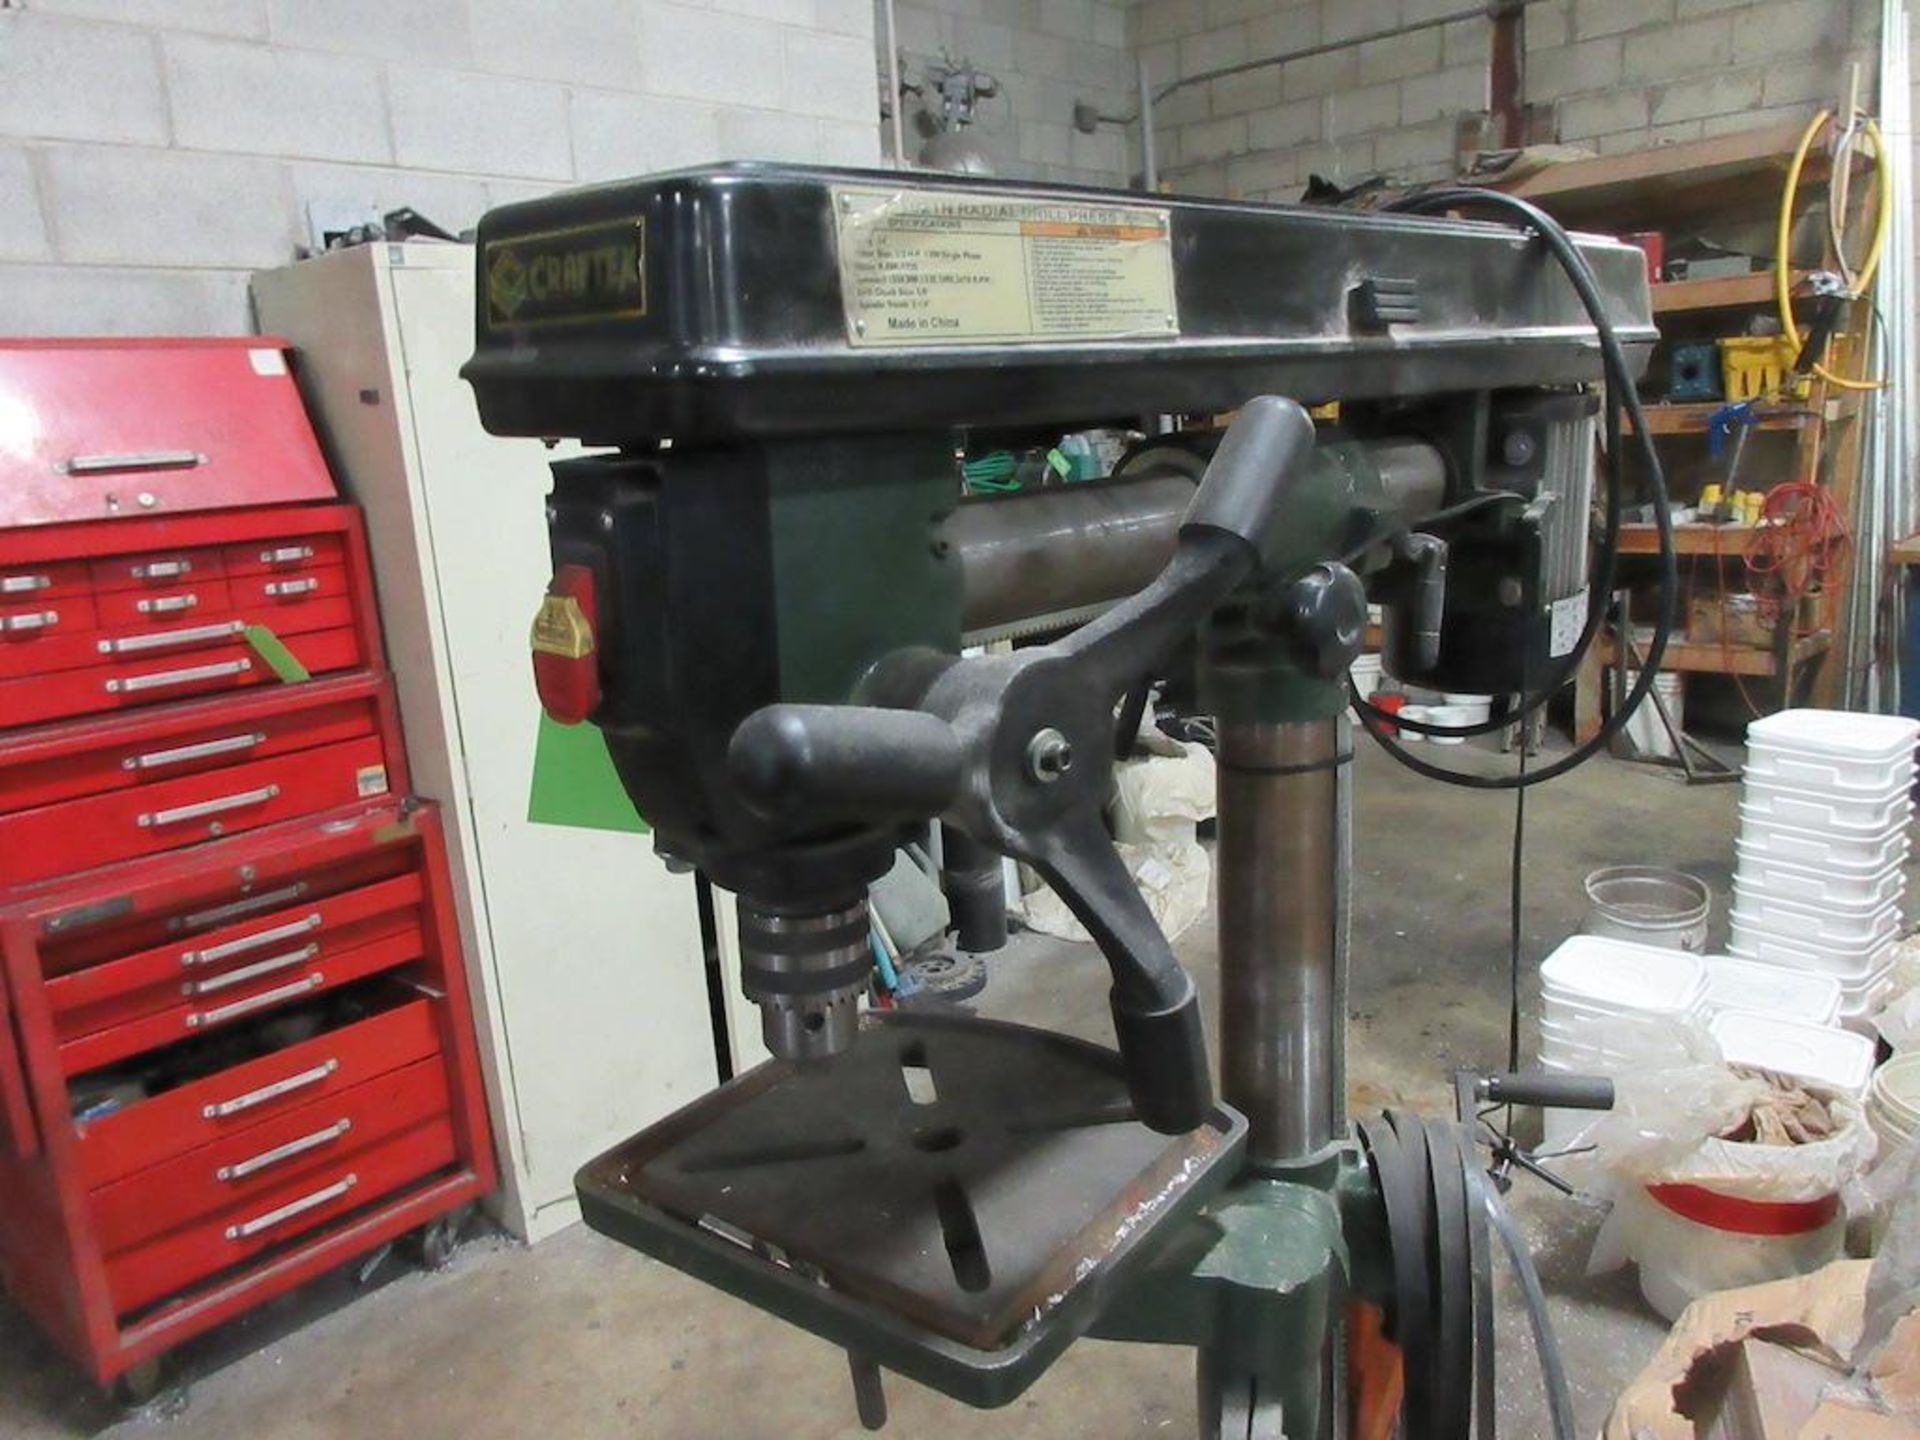 Craftex radial drill press, CT021N, 34" swing, 1/2 HP motor, 5 speed, drill chuck size 5/8", spindle - Image 3 of 4